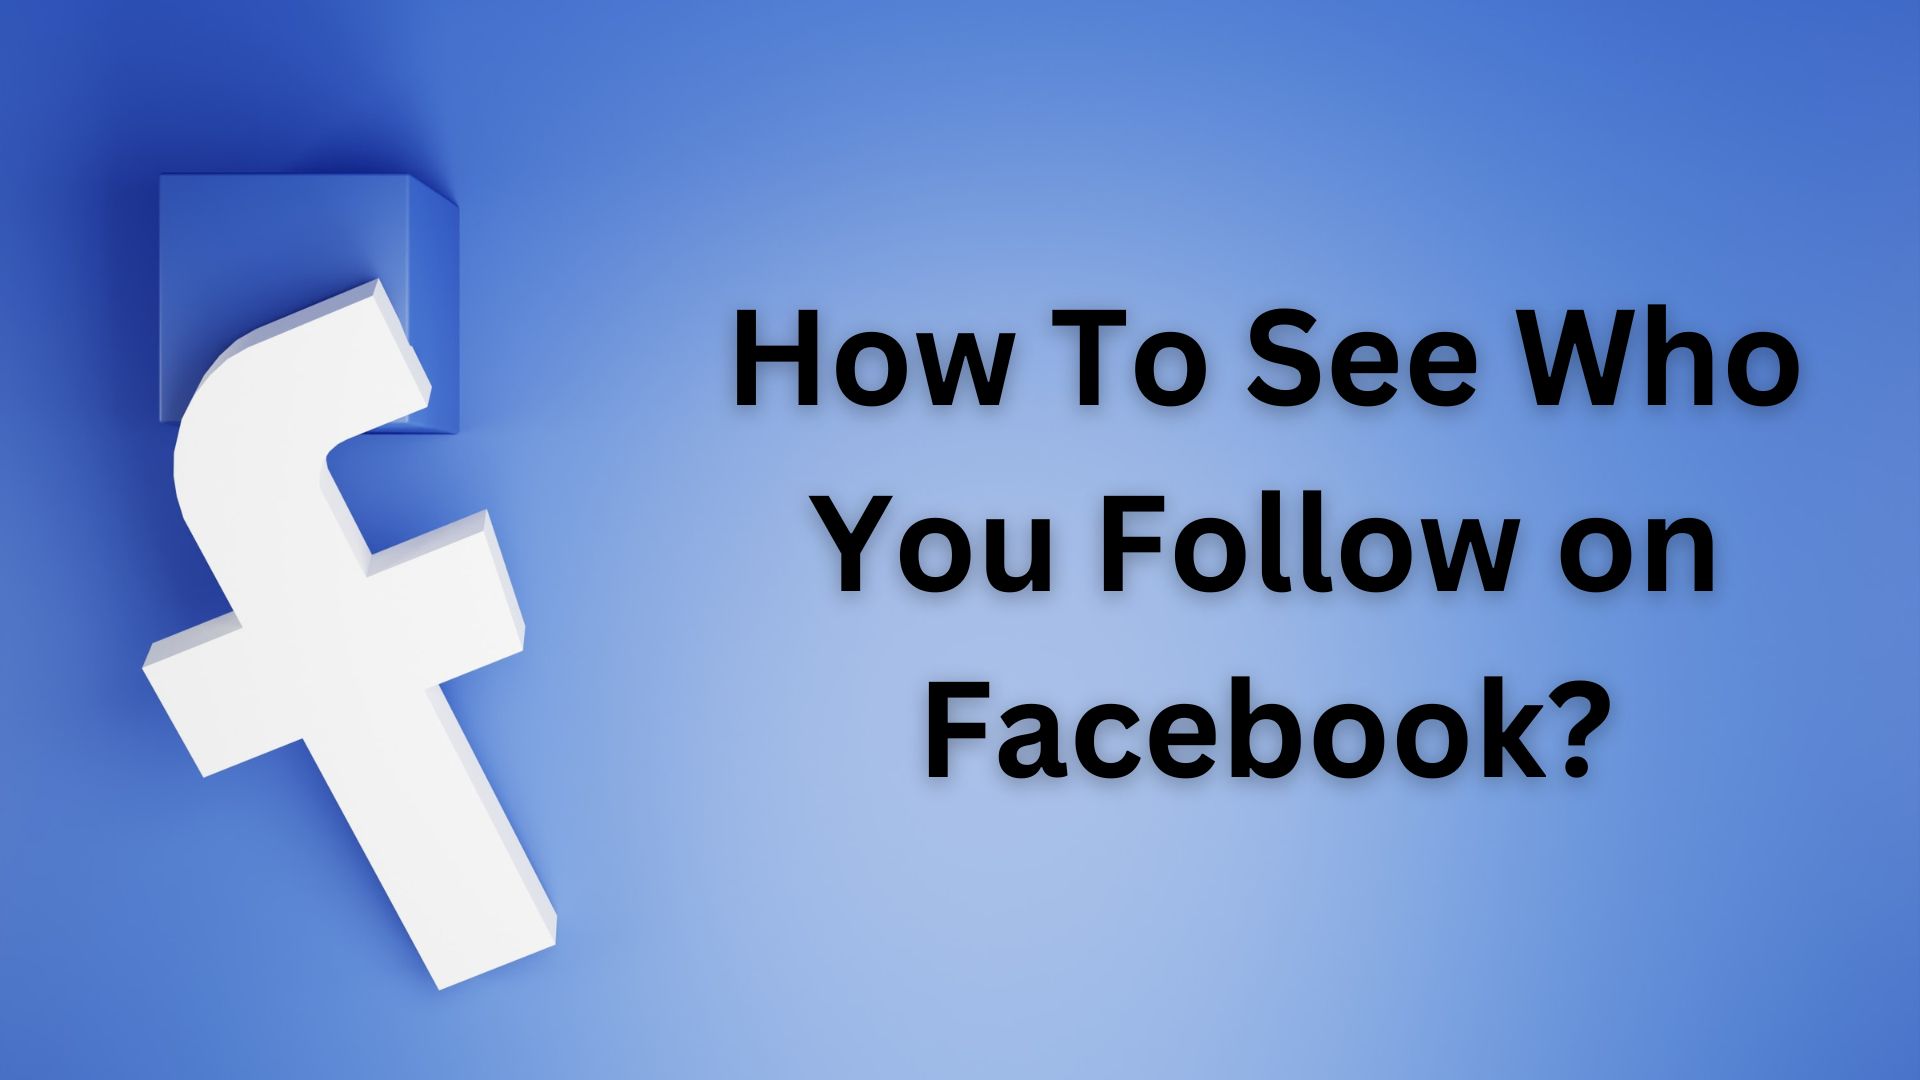 How To See Who You Follow on Facebook? Explained